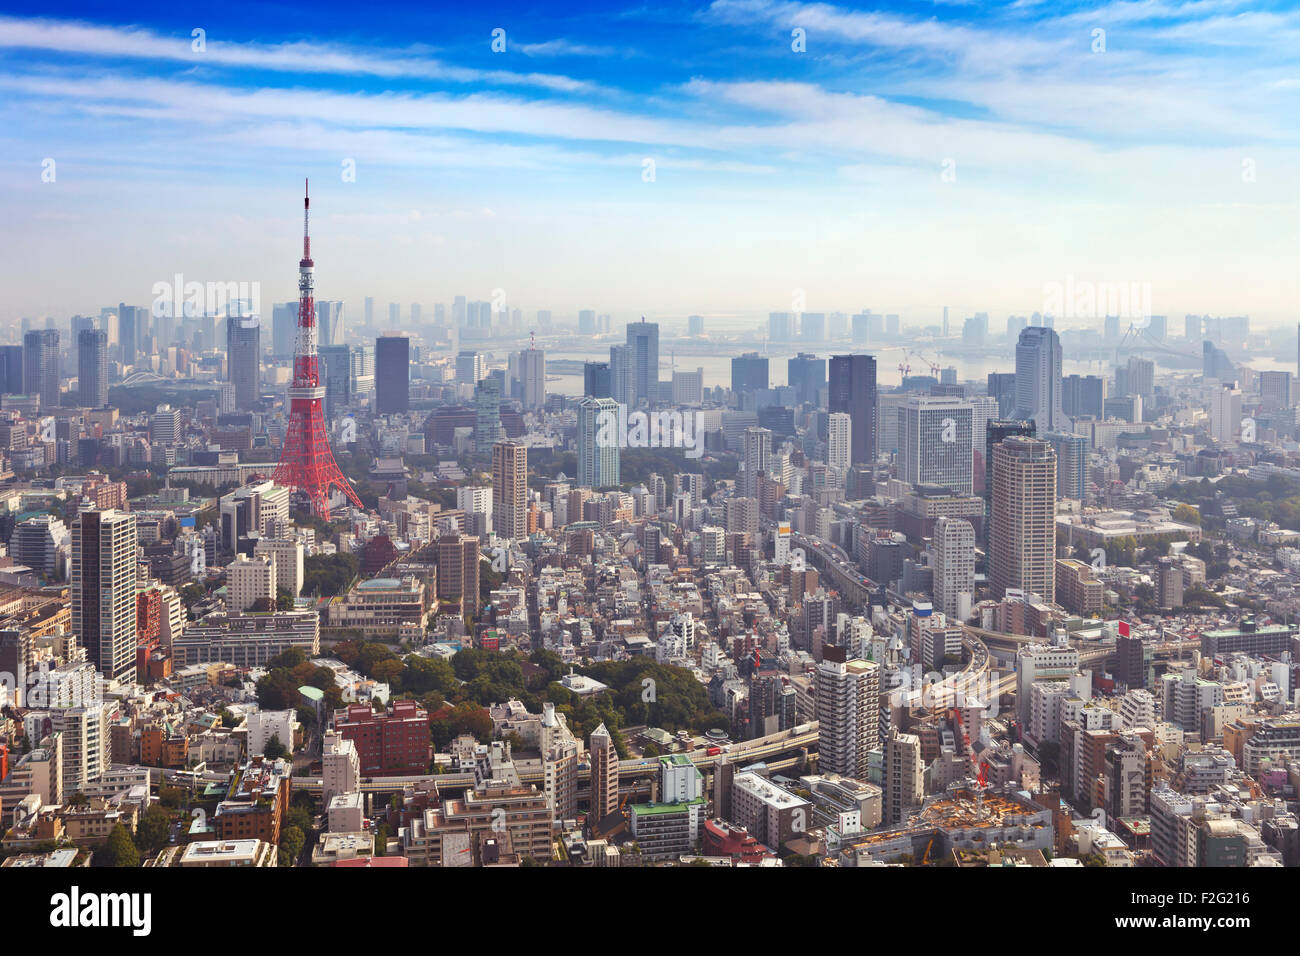 The skyline of Tokyo, Japan with the Tokyo Tower photographed from above. Stock Photo